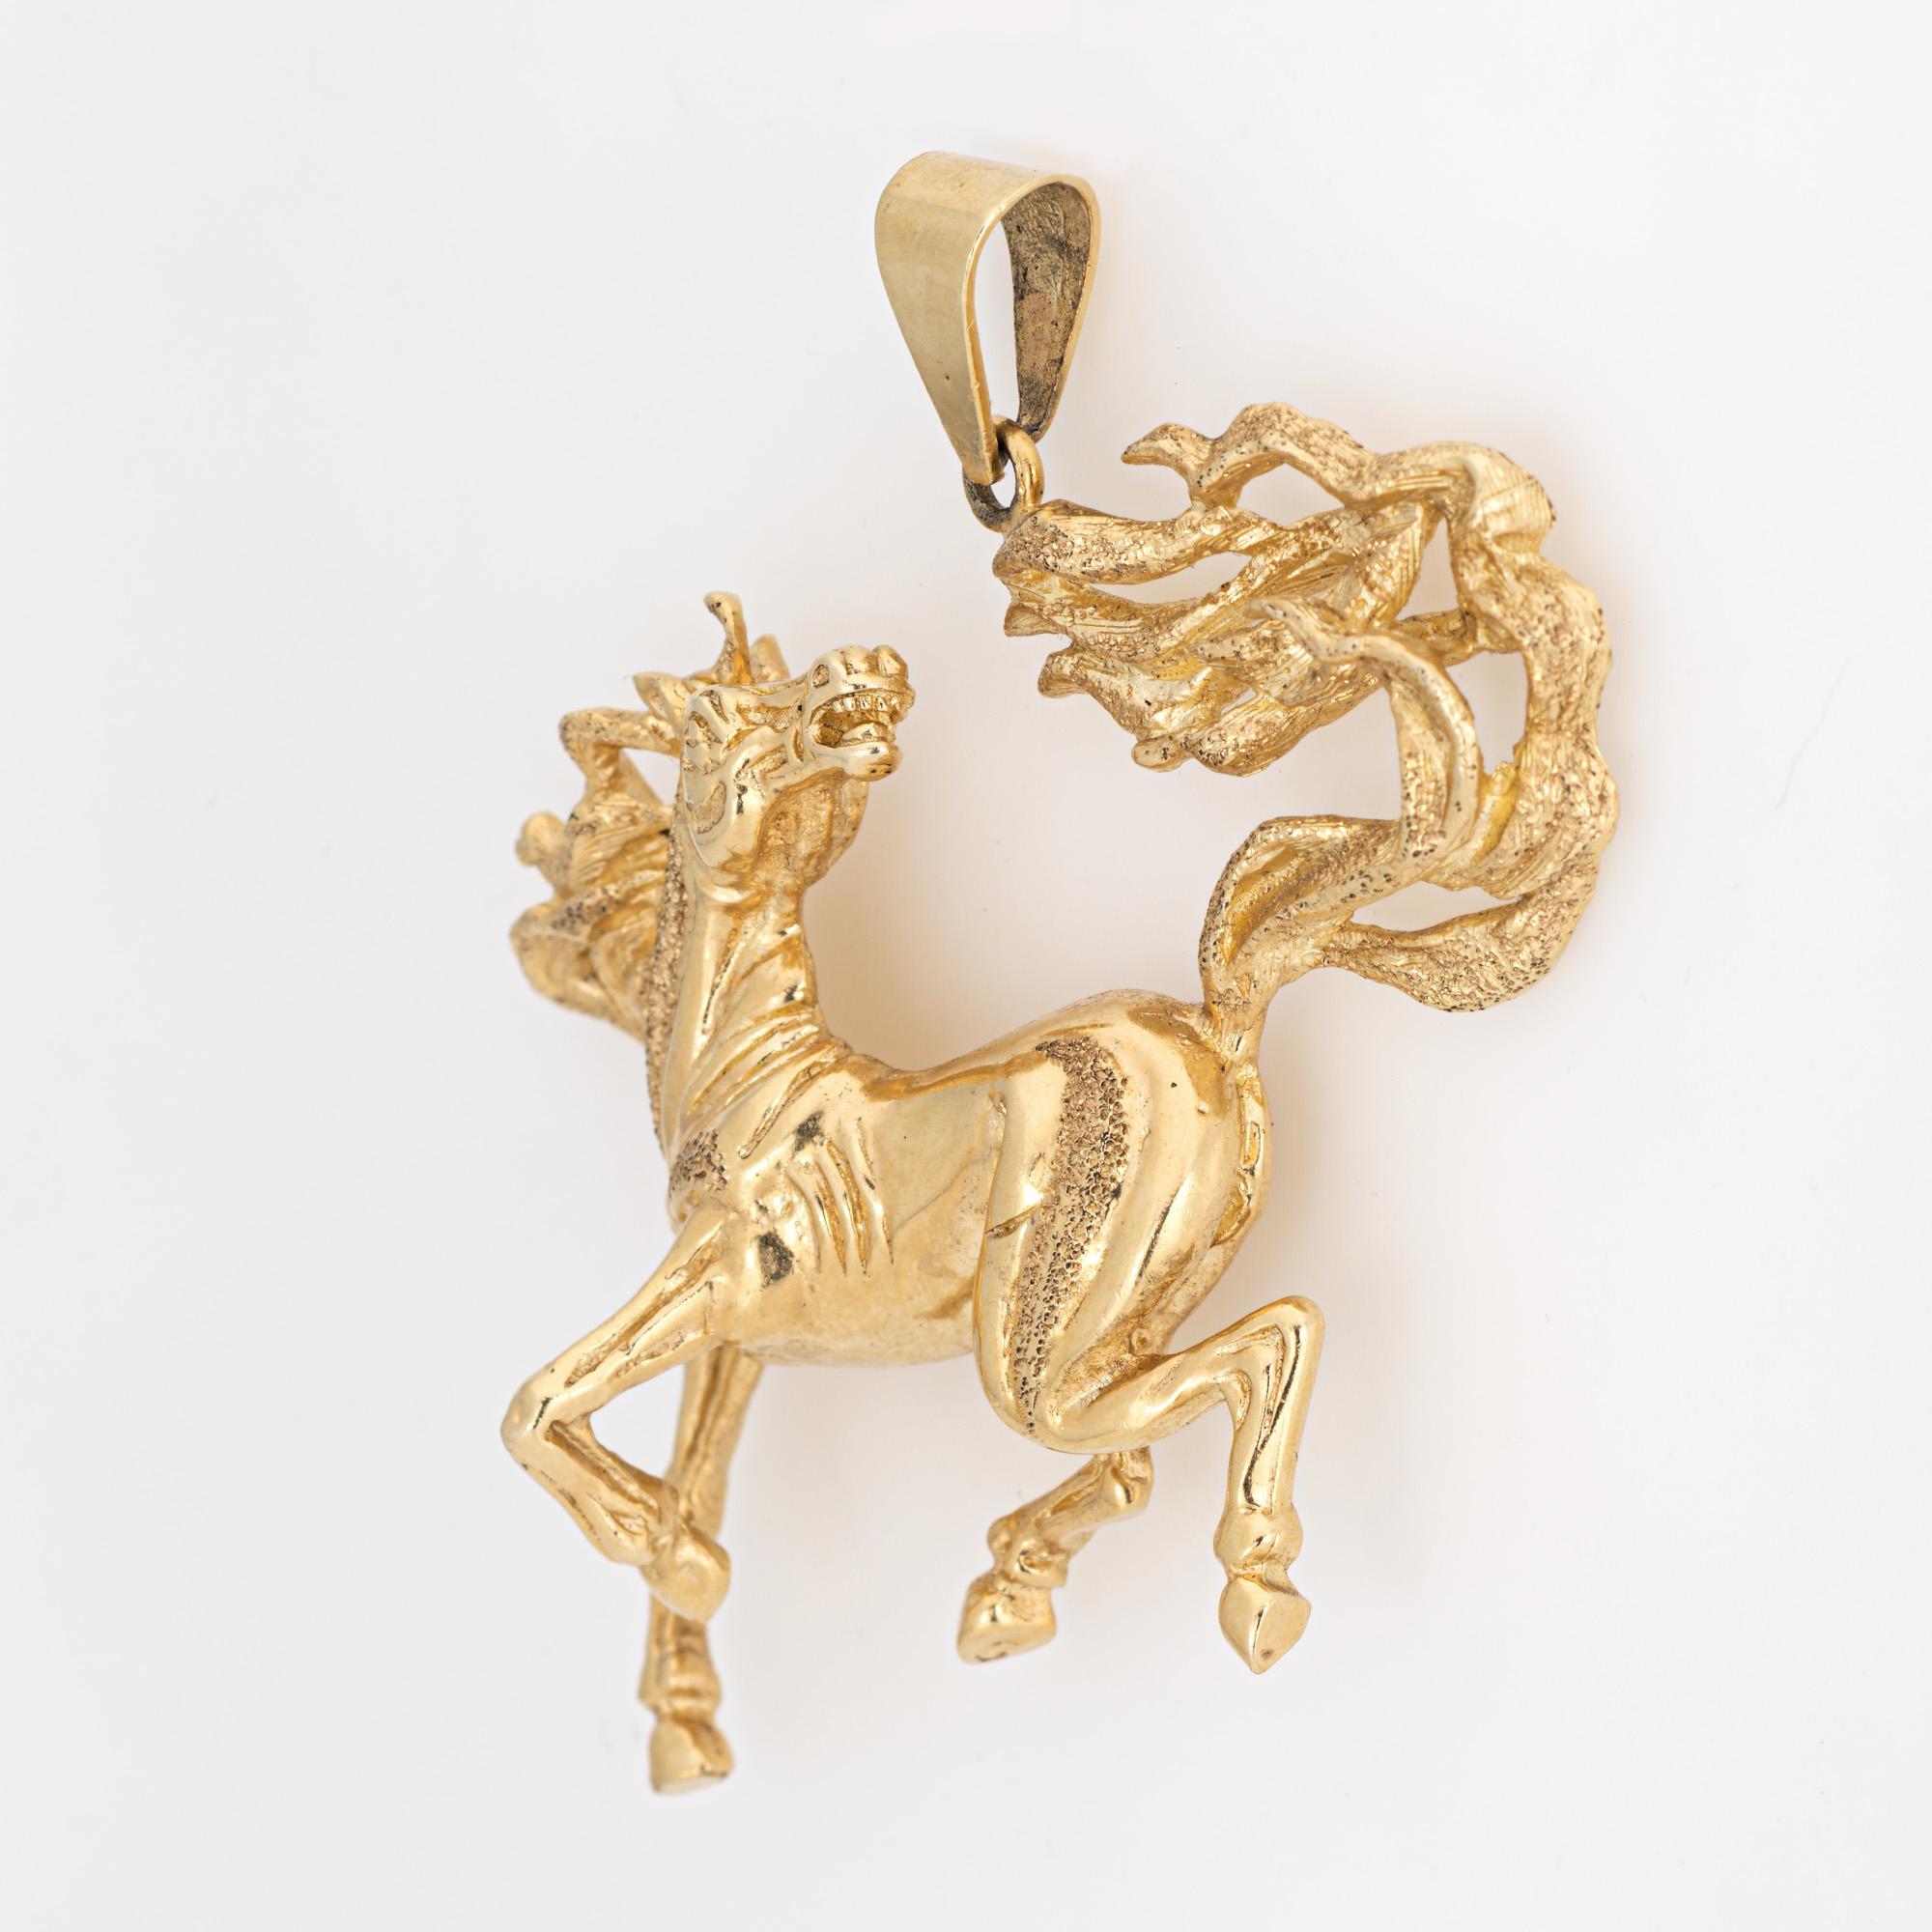 Finely detailed vintage wild horse pendant crafted in 14k yellow gold (circa 1970s to 1980s).  

Capturing the untamed spirit of the majestic wild horse, the pendant is beautifully detailed and showcases the graceful form of the horse in flight with